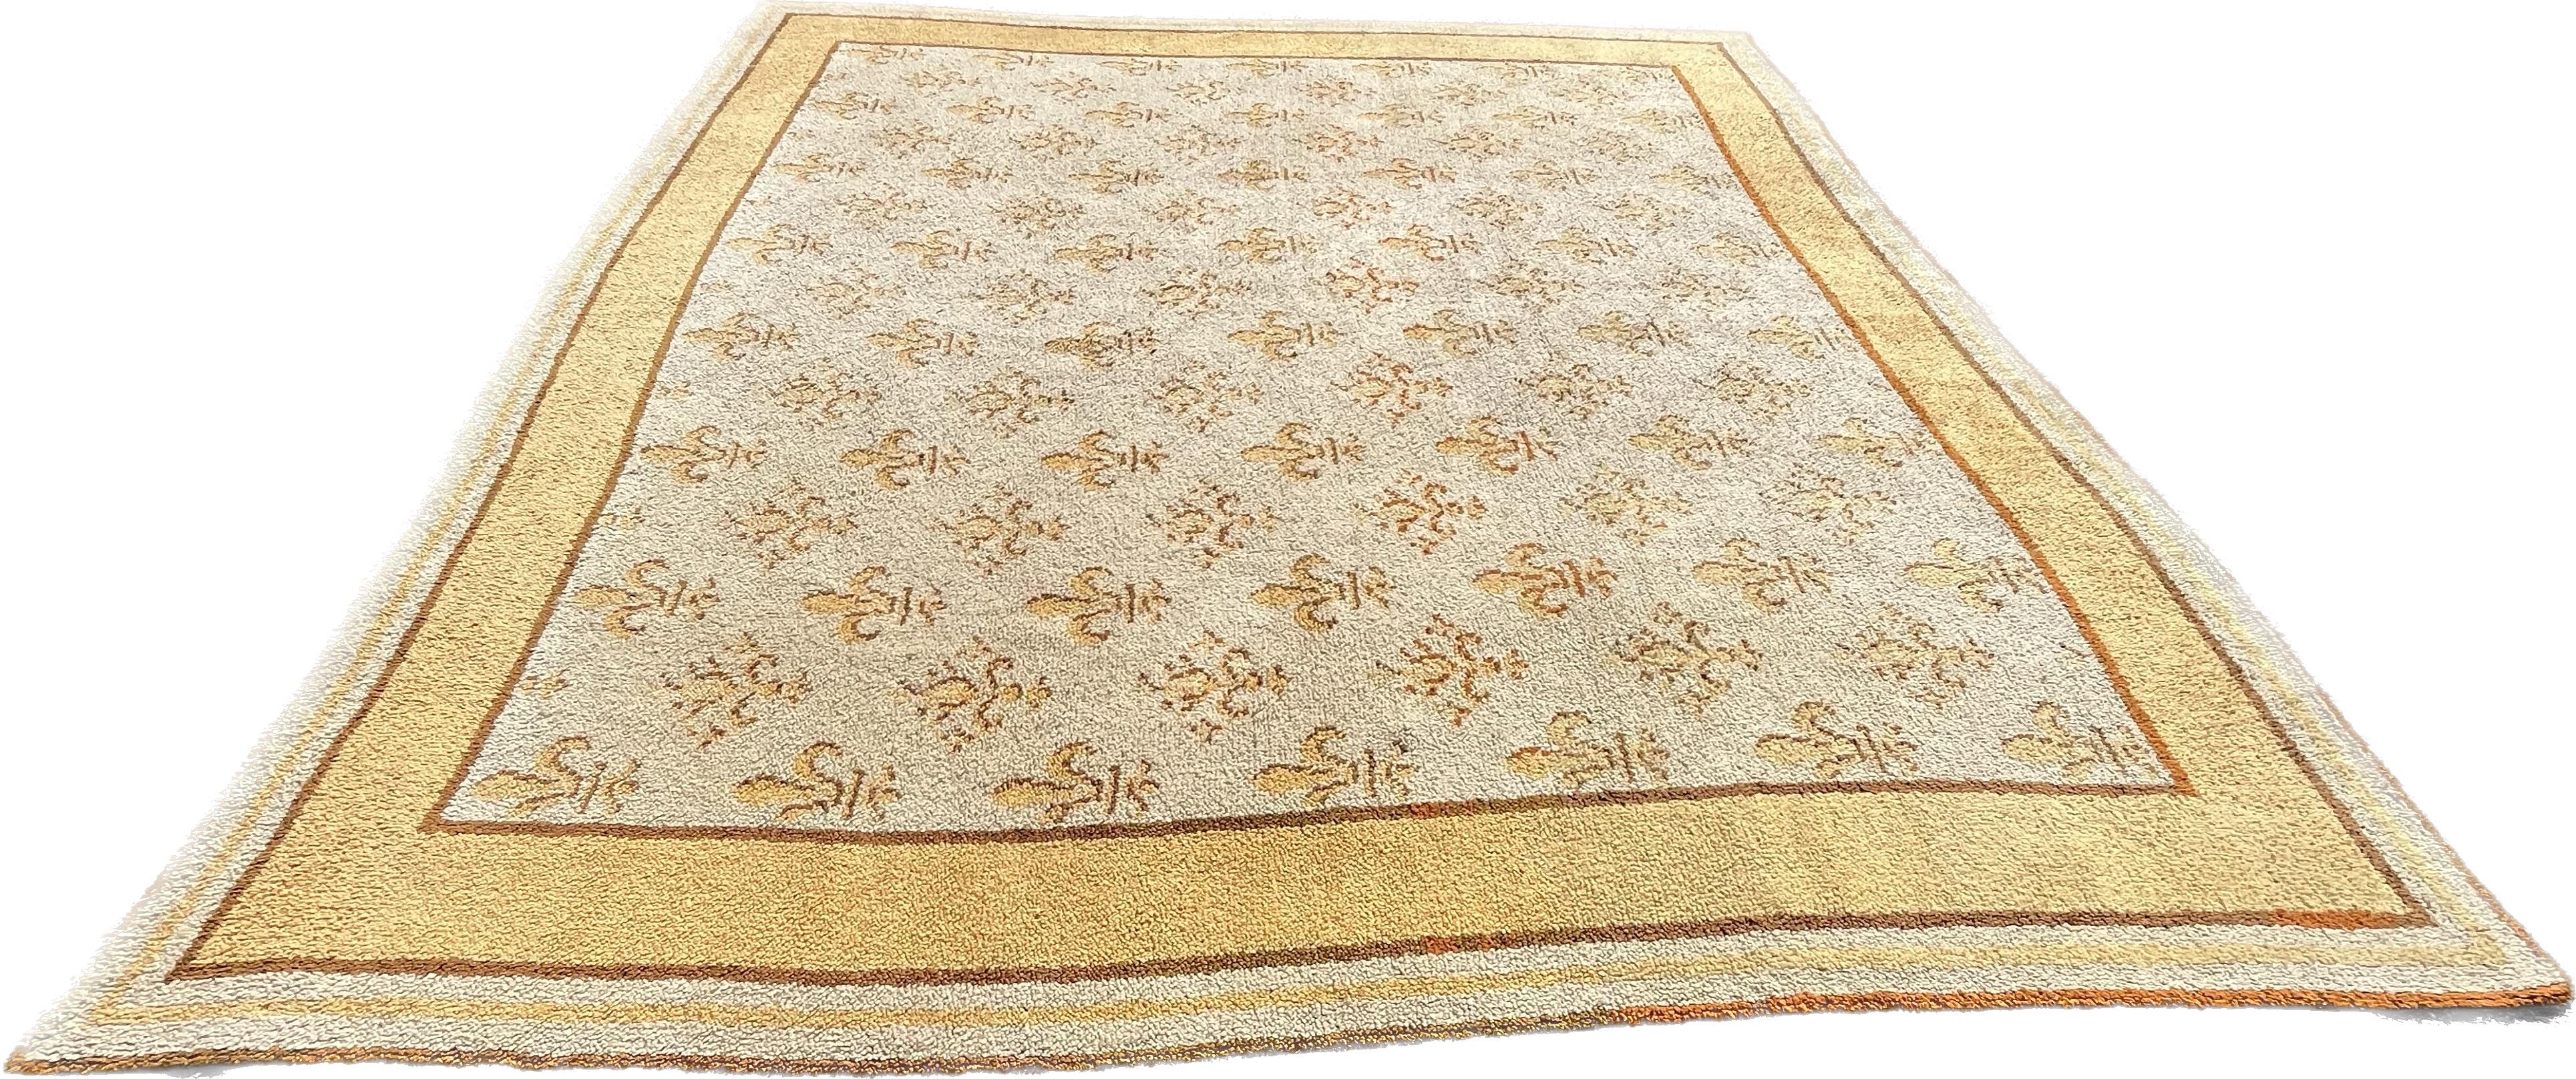 European Fleur De Lys Rug, circa 1900
The Fleur-de-Lys, Symbol of Royalty :

The King's Pavilion under the Ancien Régime. The flag of the Kingdom of France generally includes three fleur-de-lys, evoking the Holy Trinity as well as the theological